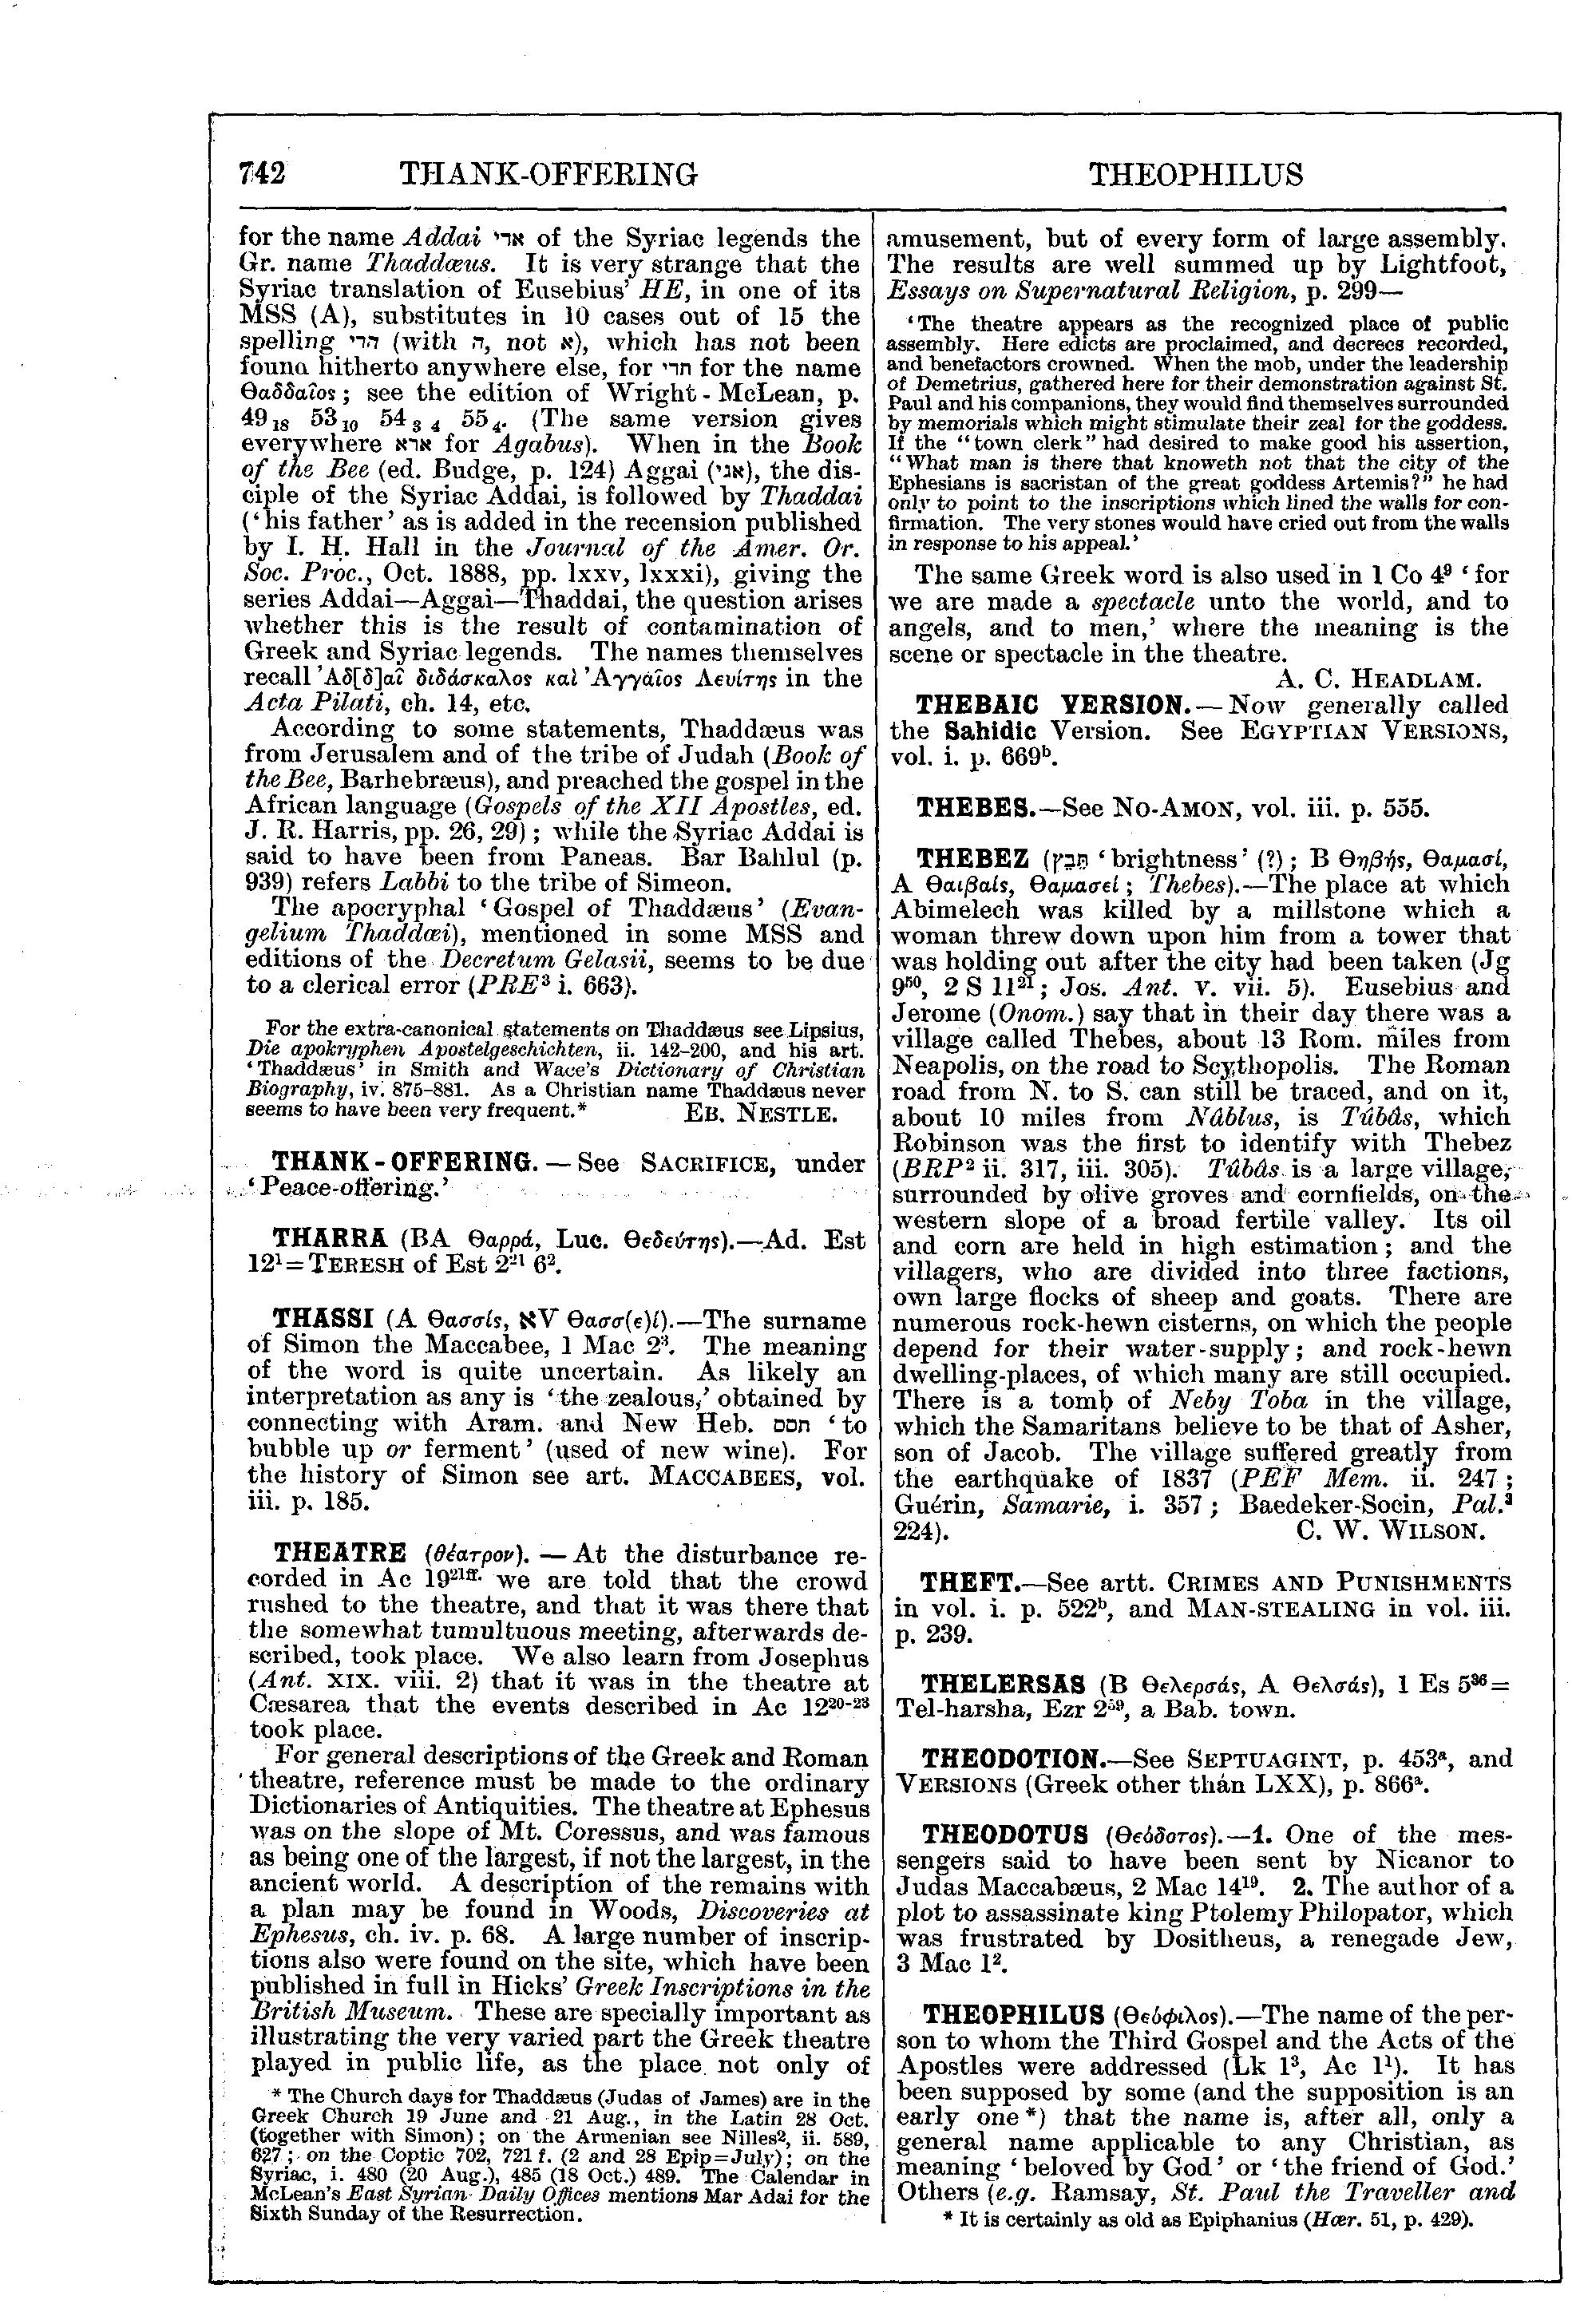 Image of page 742